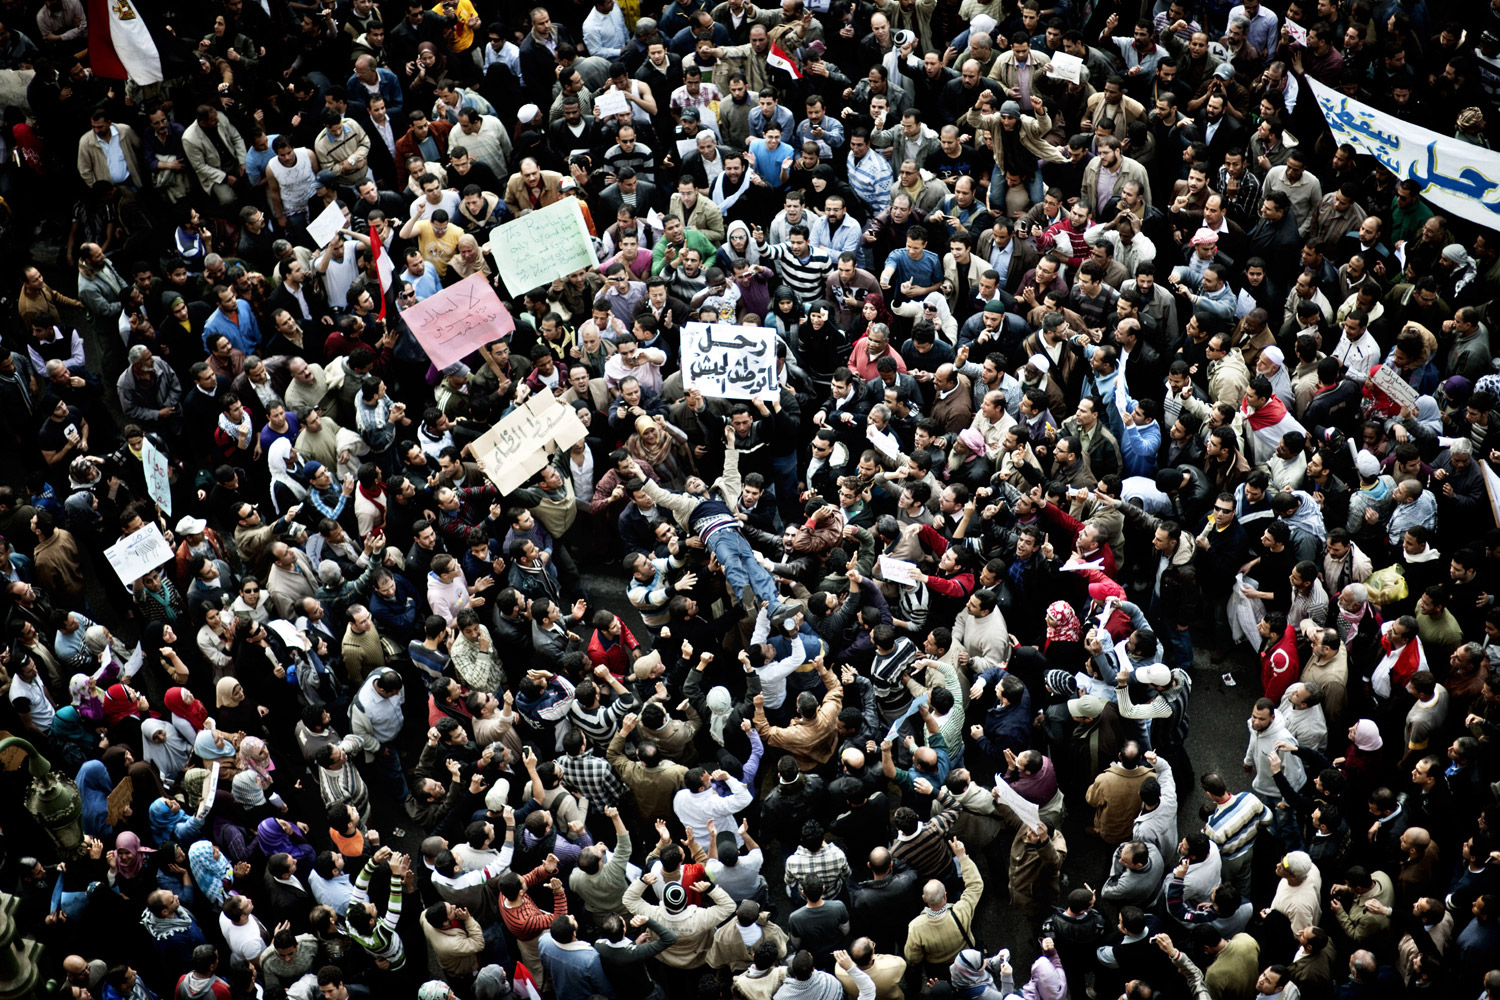 Yuri Kozyrev. From  The Revolution . February 14, 2011 issue (cover story).
                              
                              A crowd lifts a demonstrator during the February 1st march in Tahrir Square, Egypt.